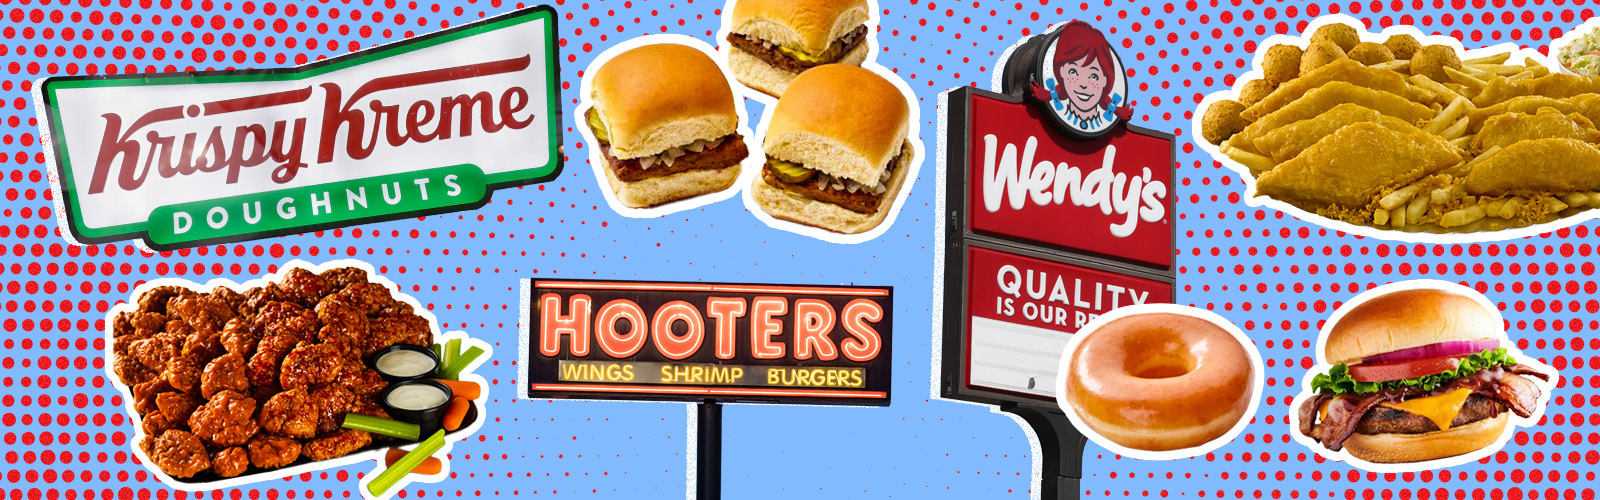 The Best Fast Food & Restaurant Deals For Memorial Day Weekend To Get You Fed On The Cheap